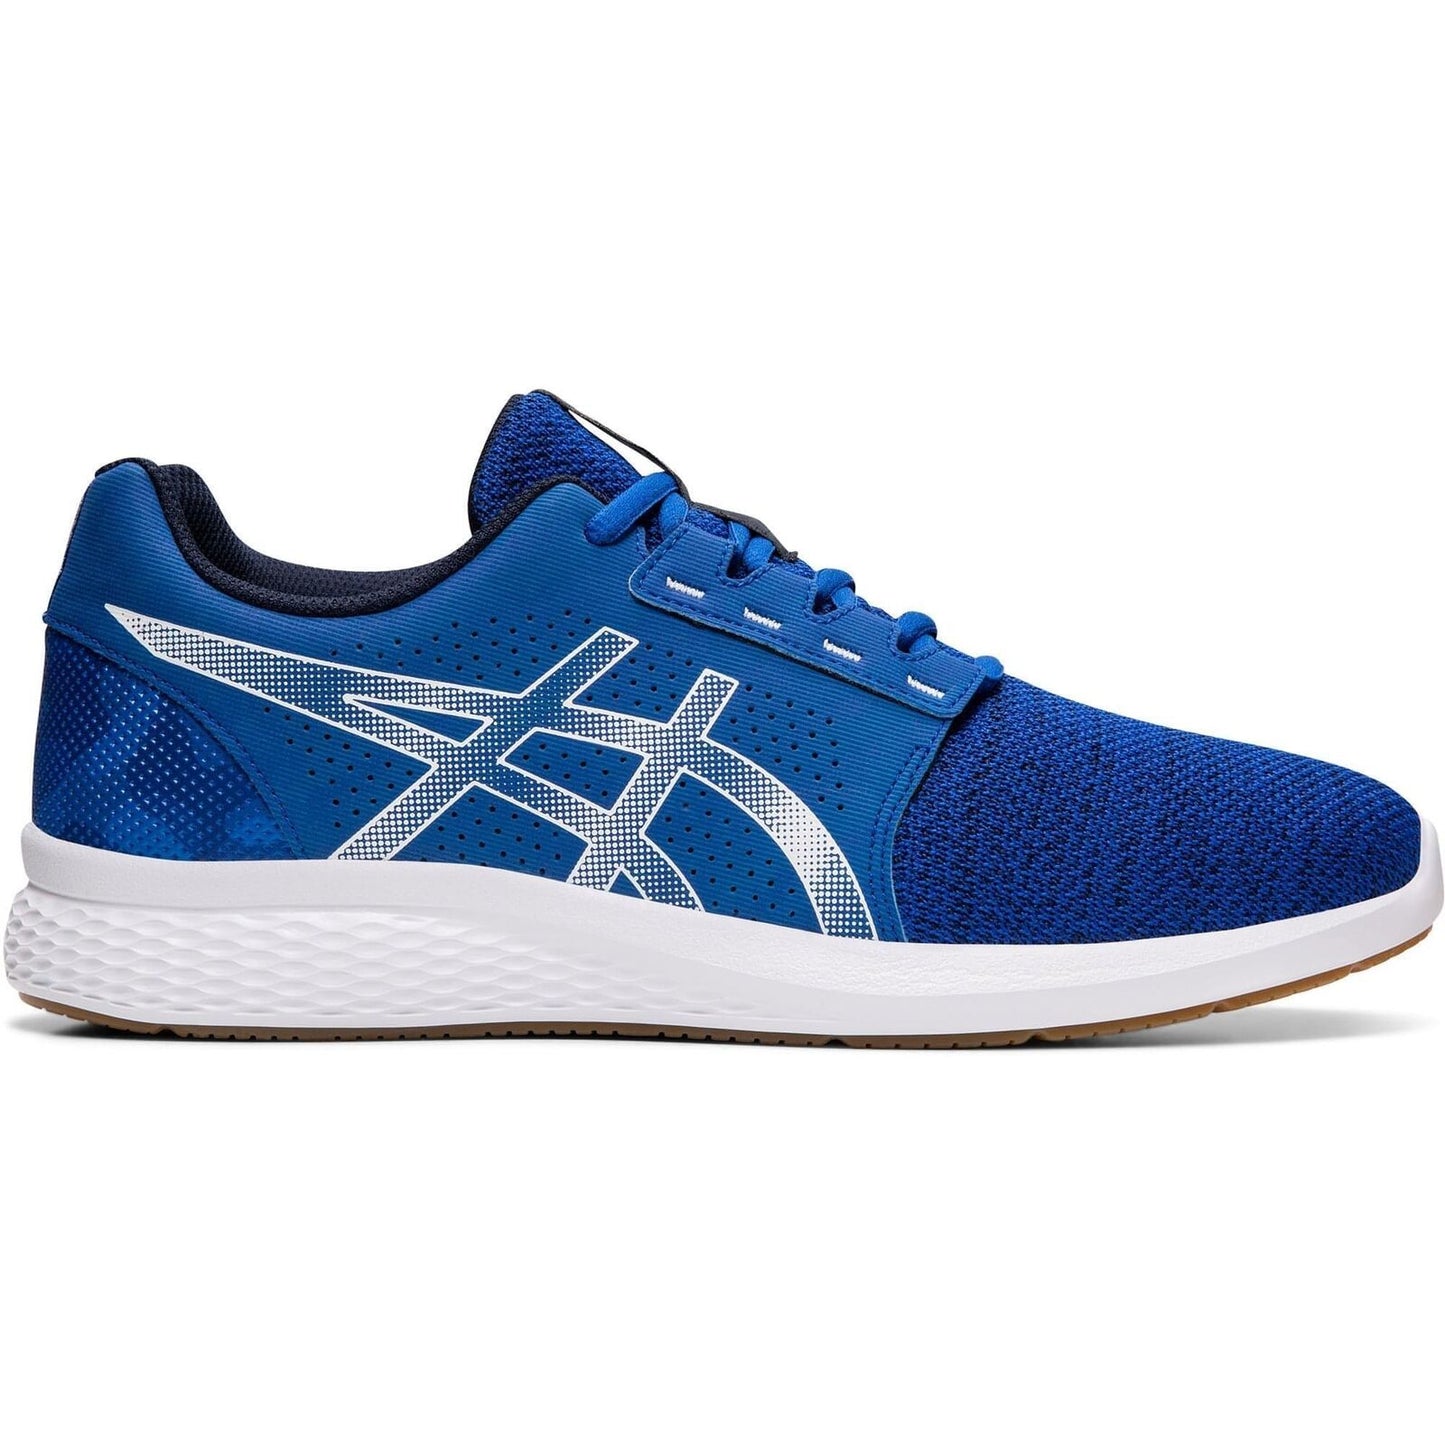 Asics Gel Torrance 2 Mens Running Shoes - Blue RRP £59.99 - Not available in UK